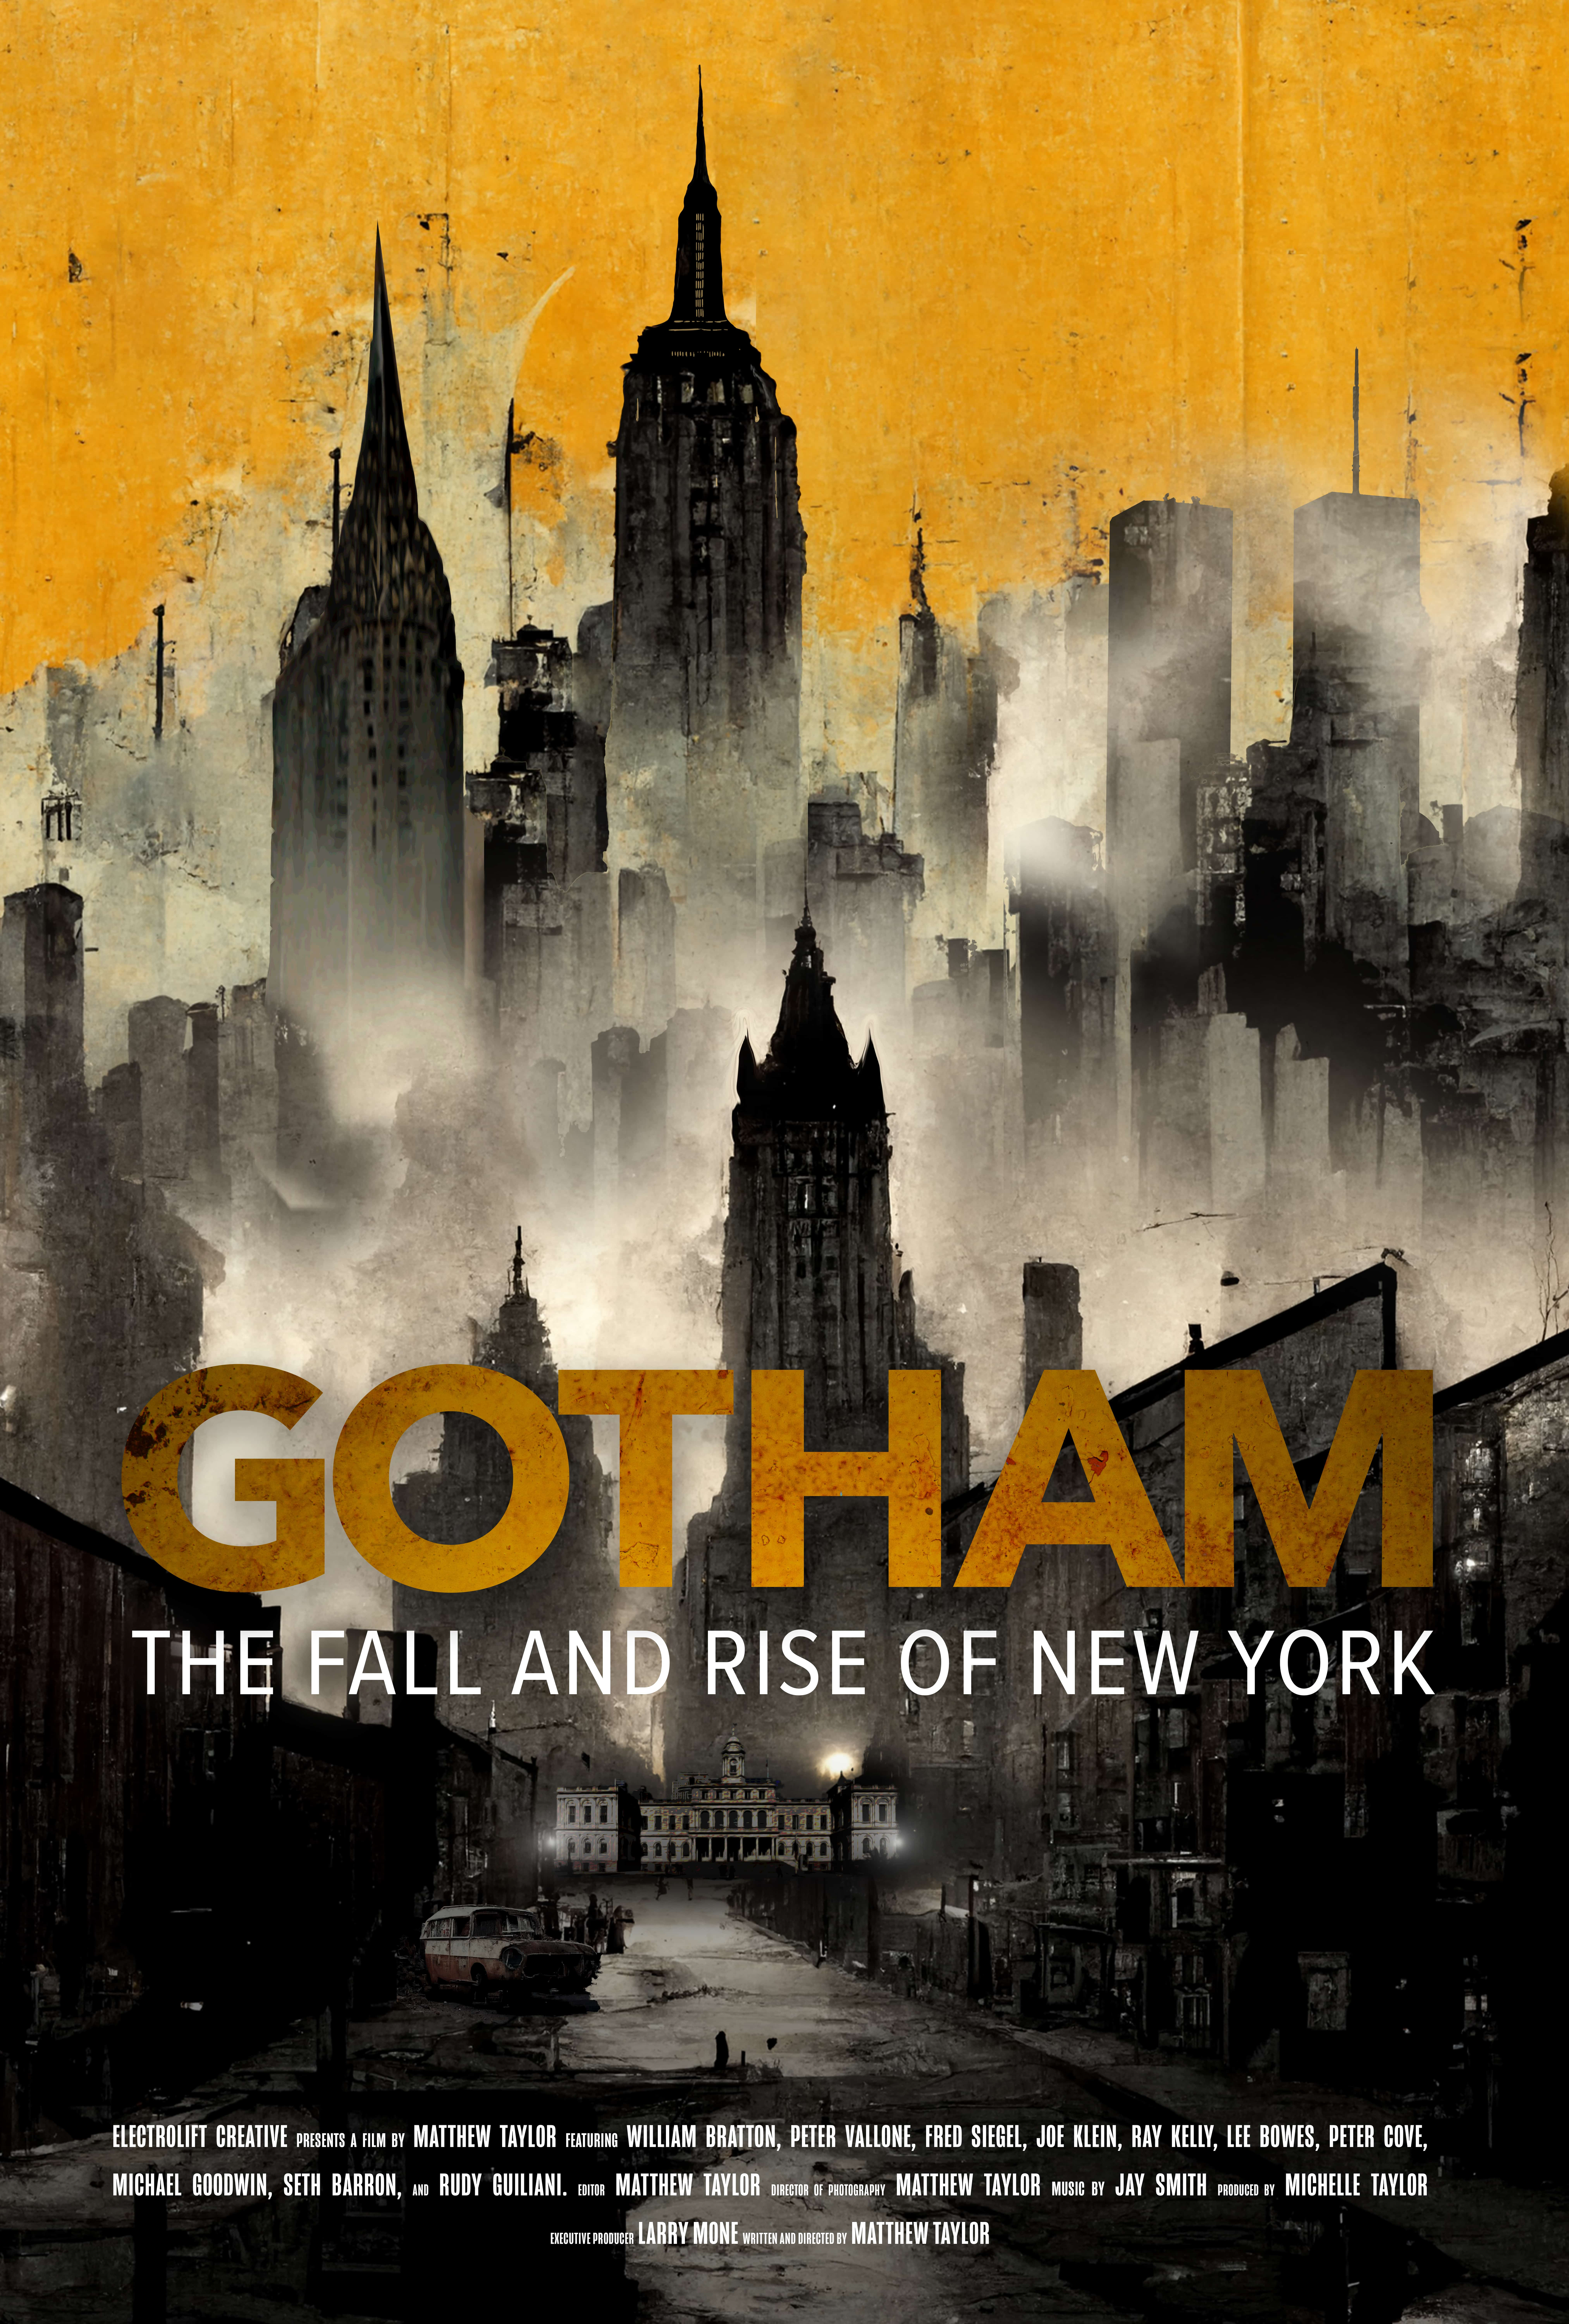 Watch Gotham: The Fall and Rise of New York Available On-Demand March 21 26